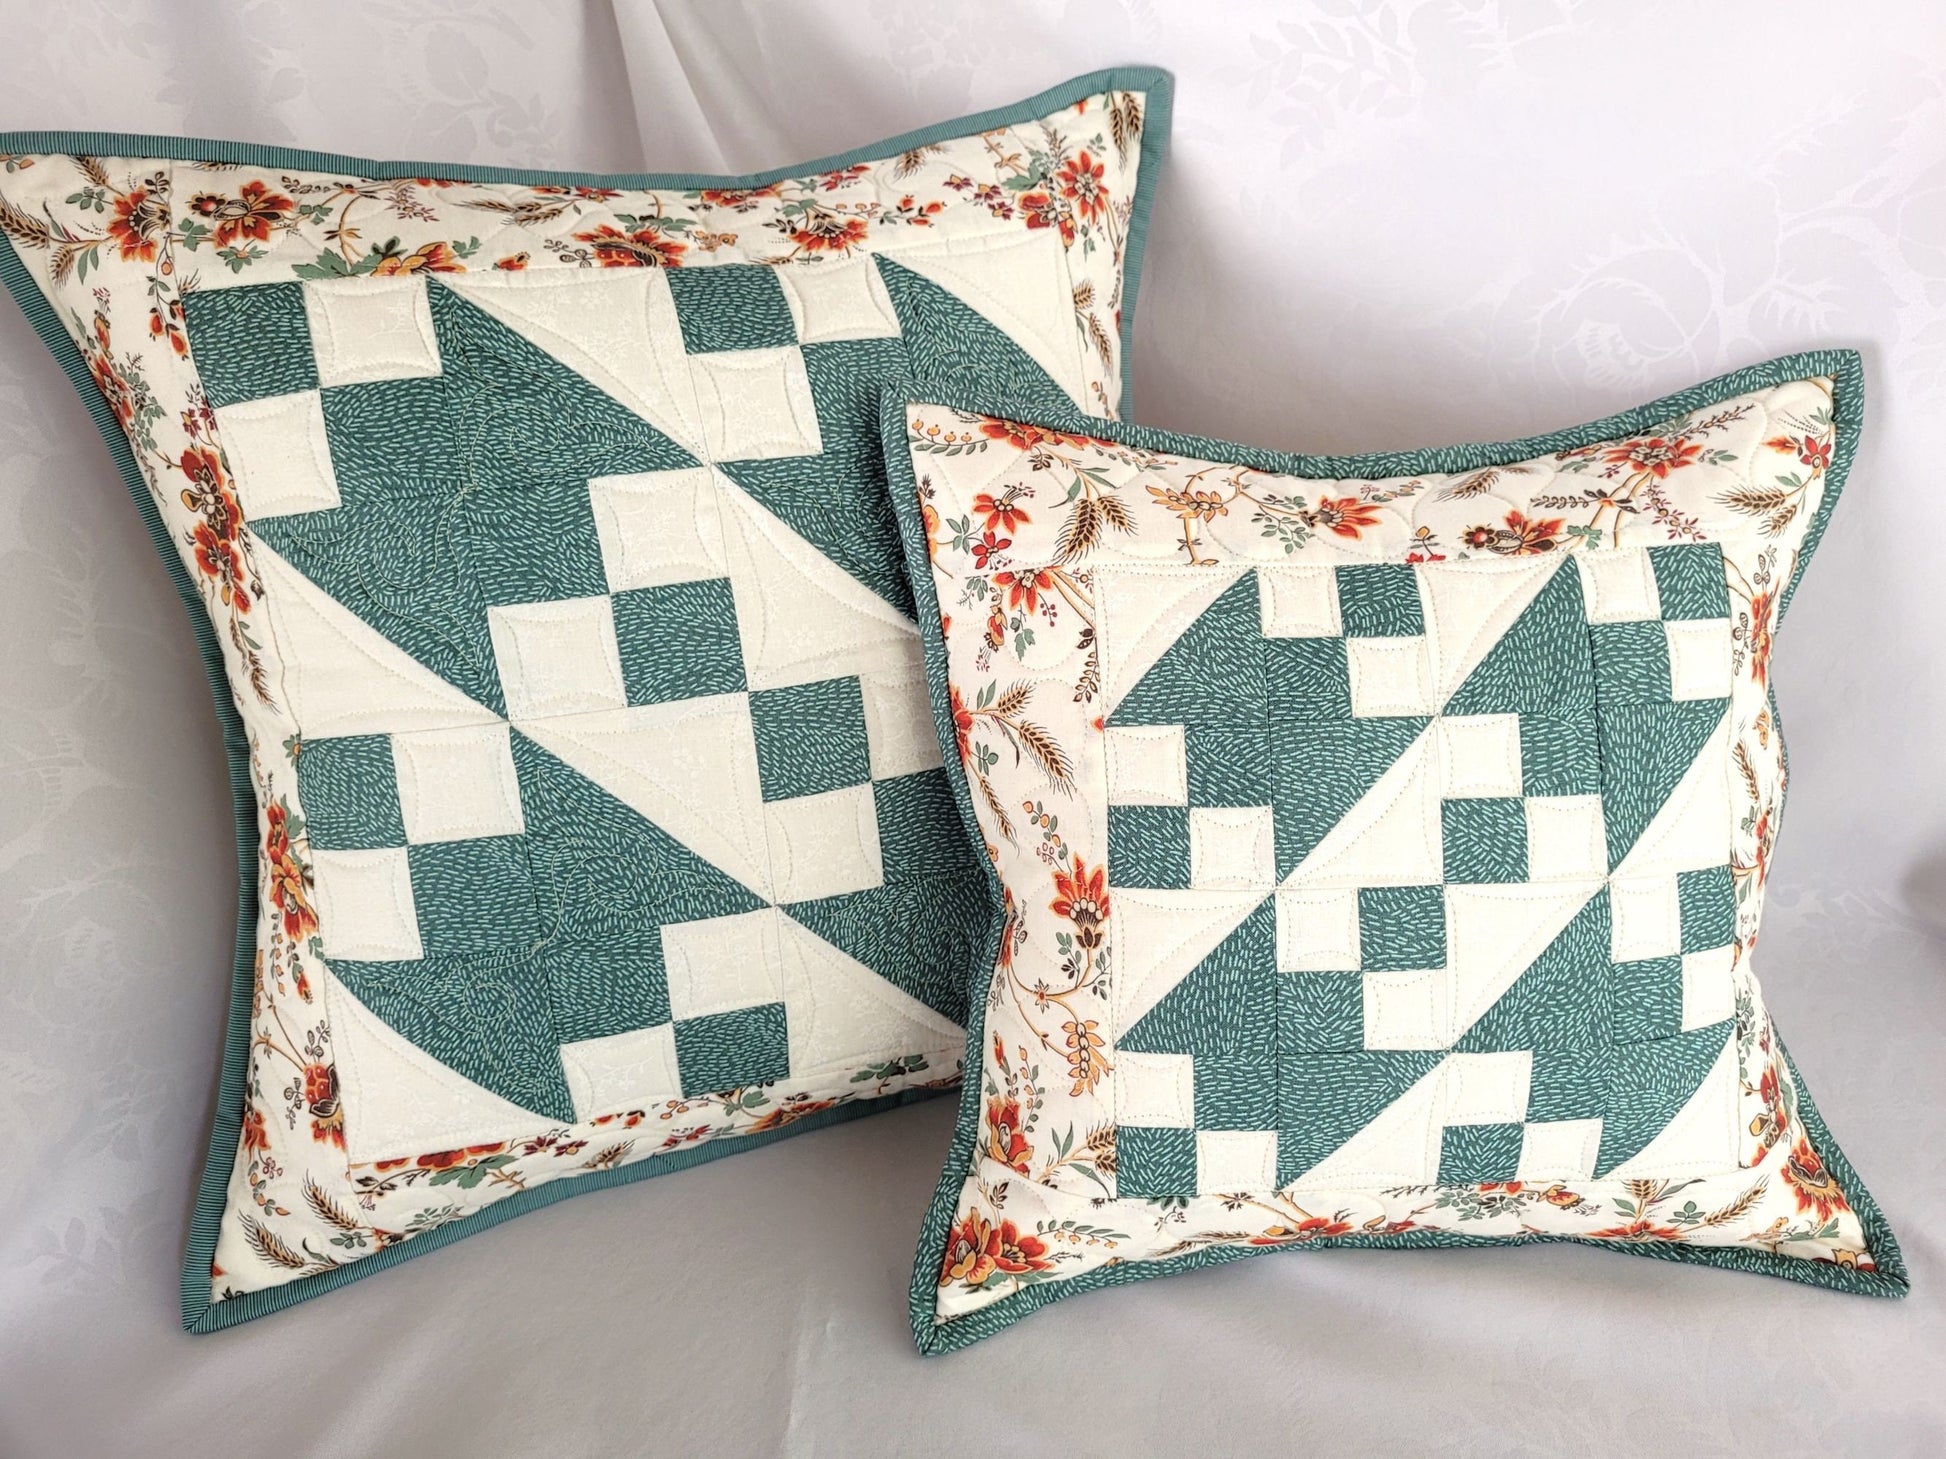 patchwork pillow in teal and white